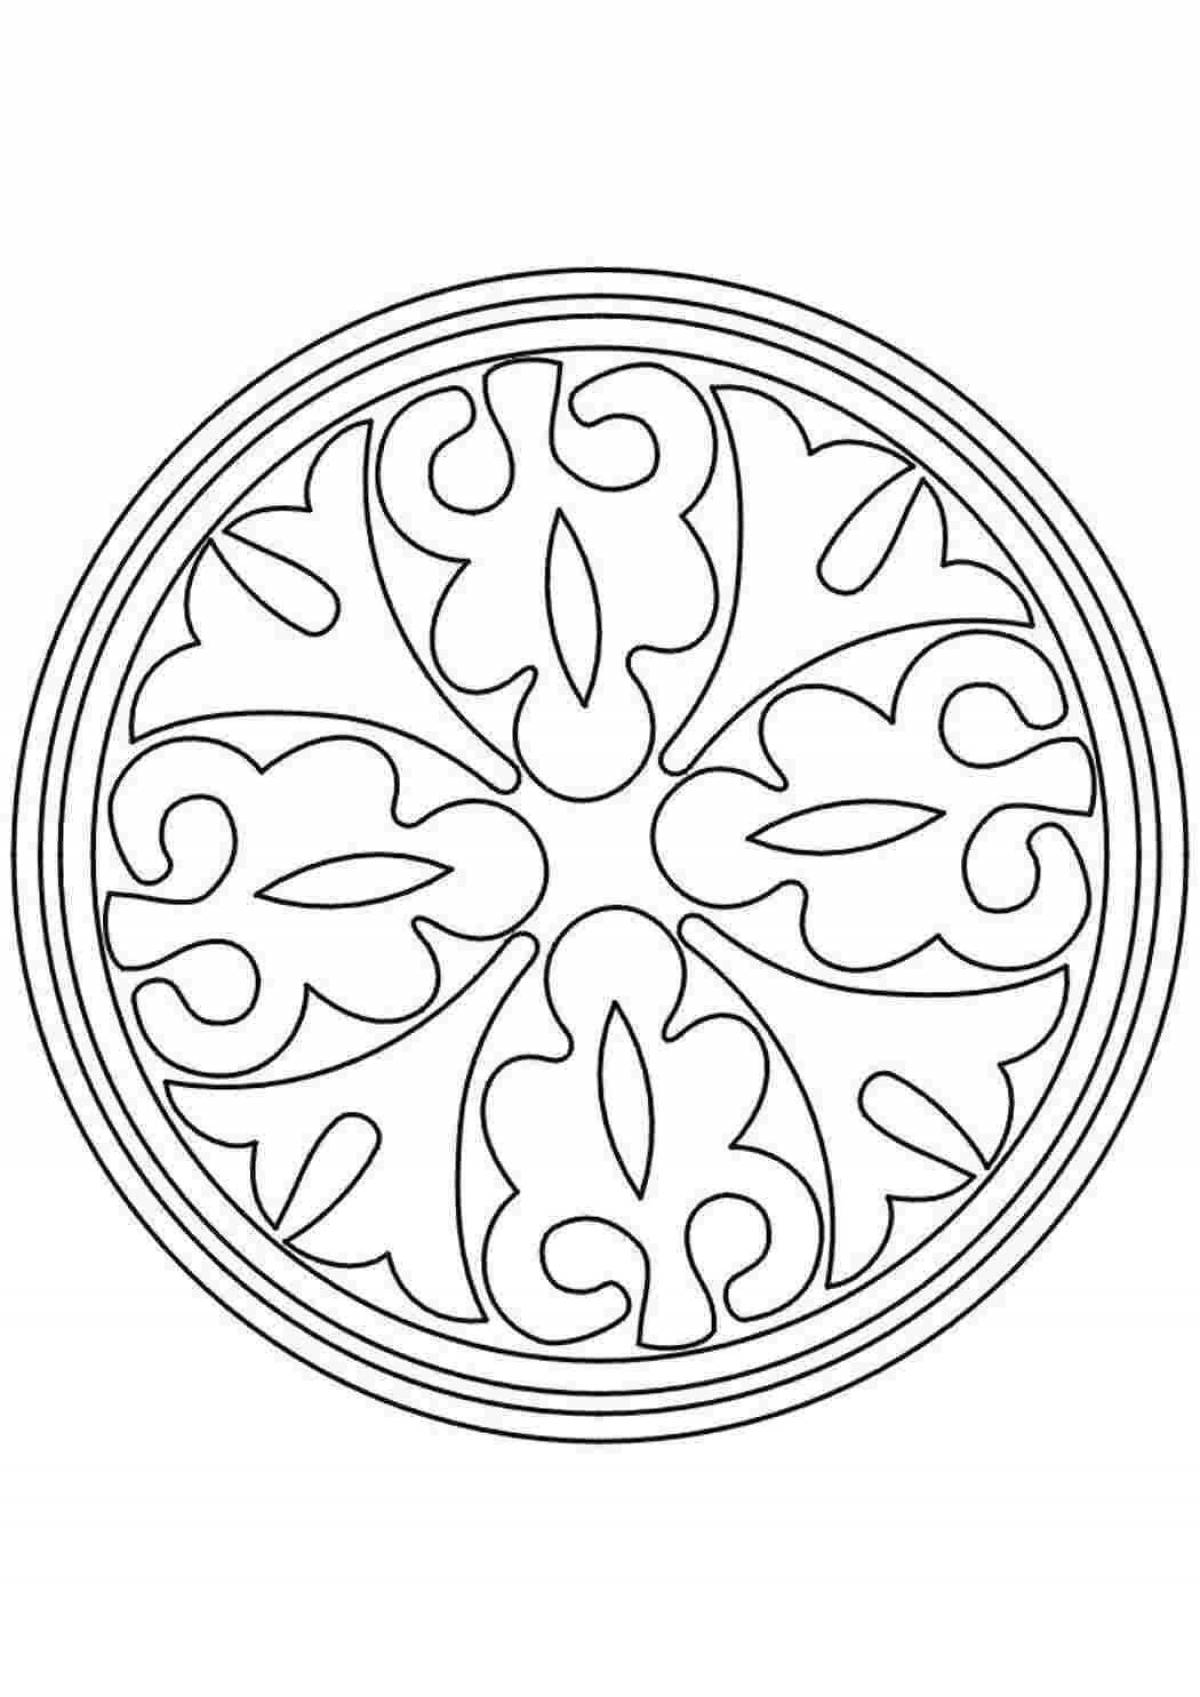 Exquisite patterns and ornaments for coloring for children